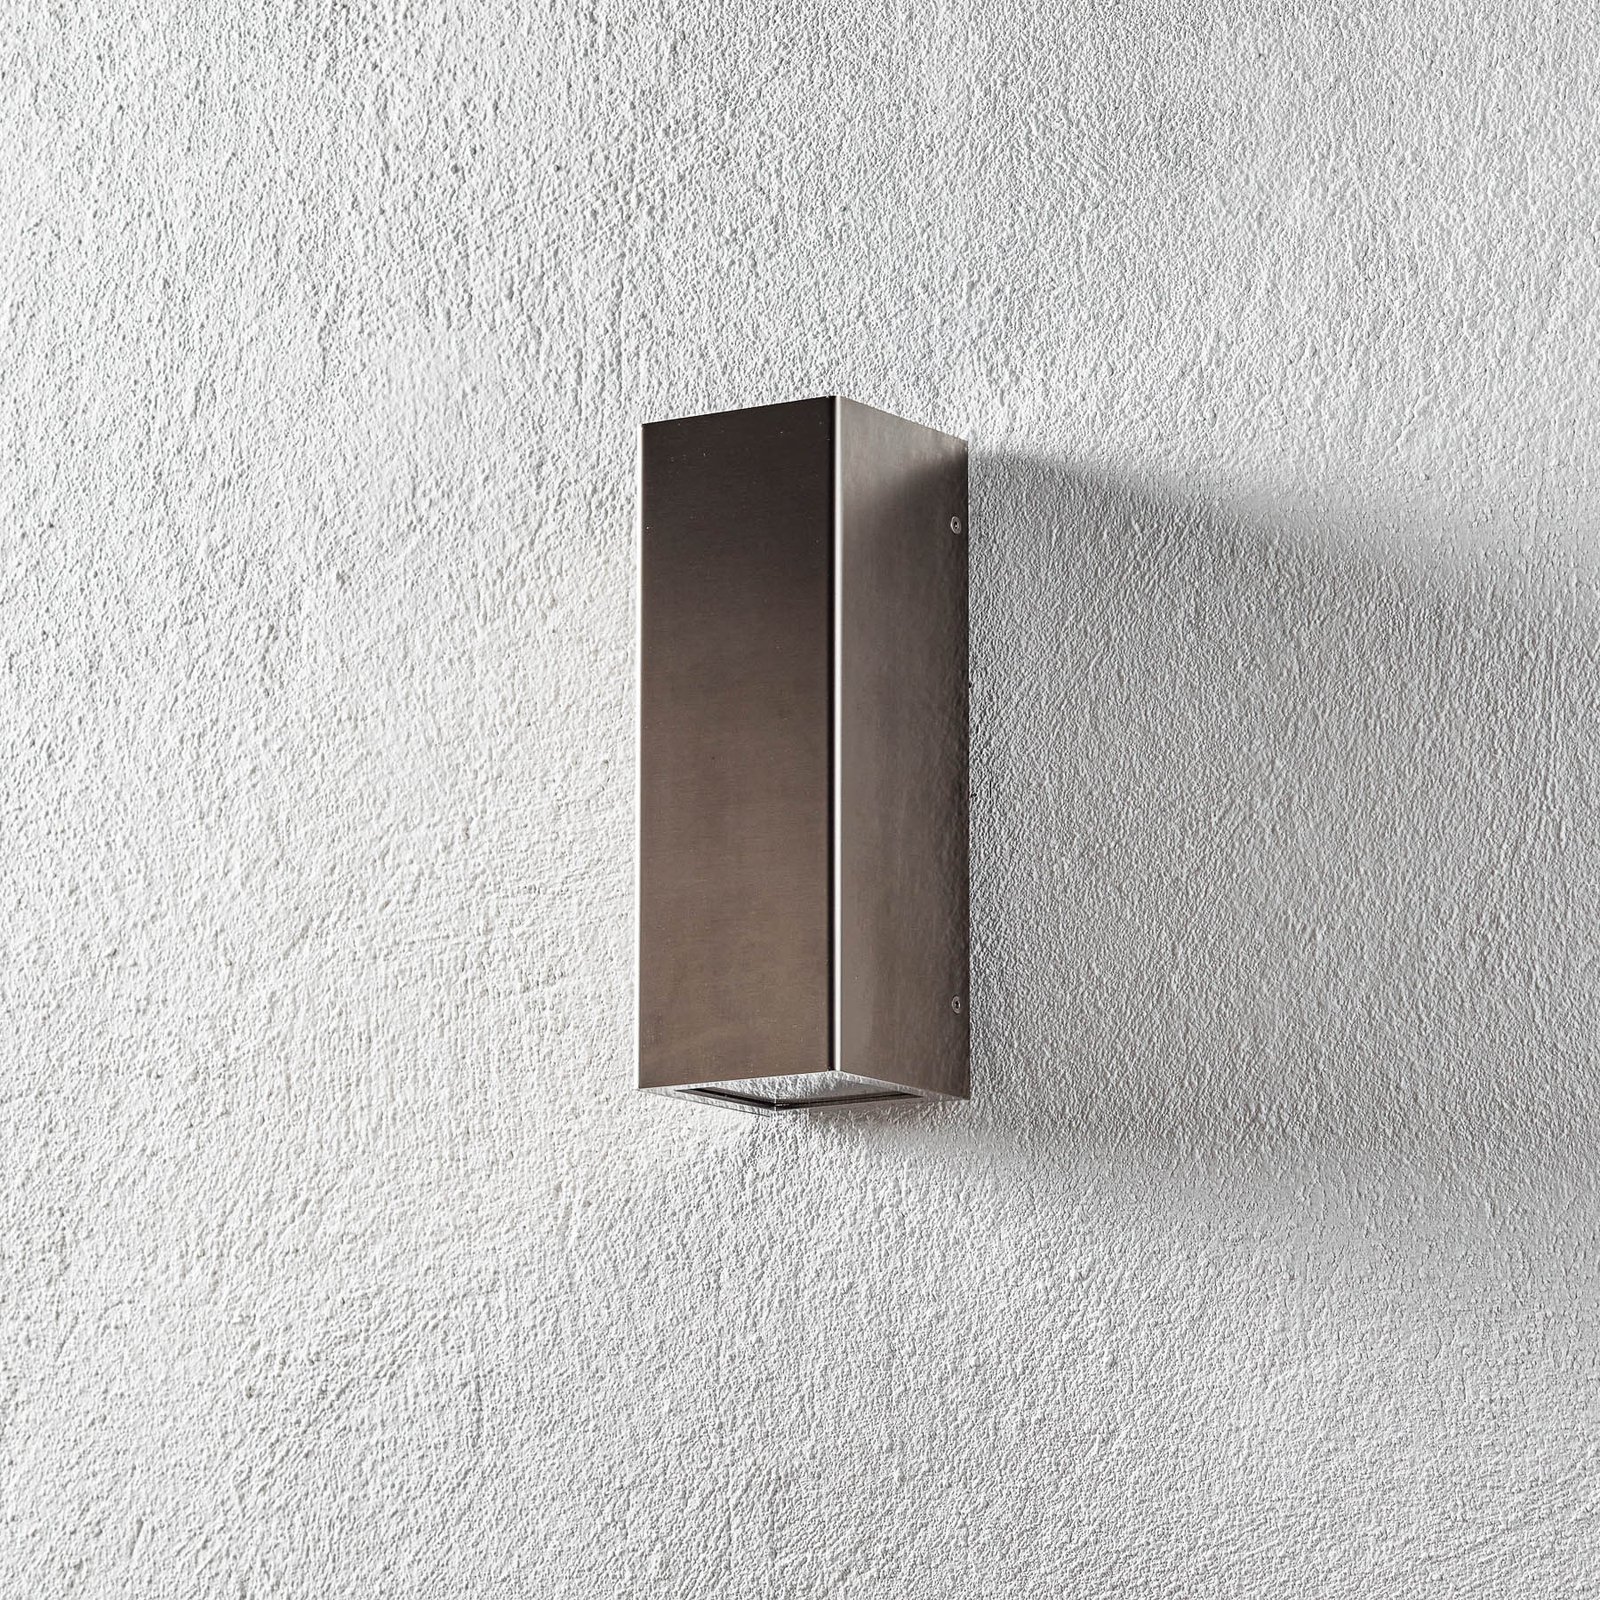 The Senta - a high-quality outdoor wall light